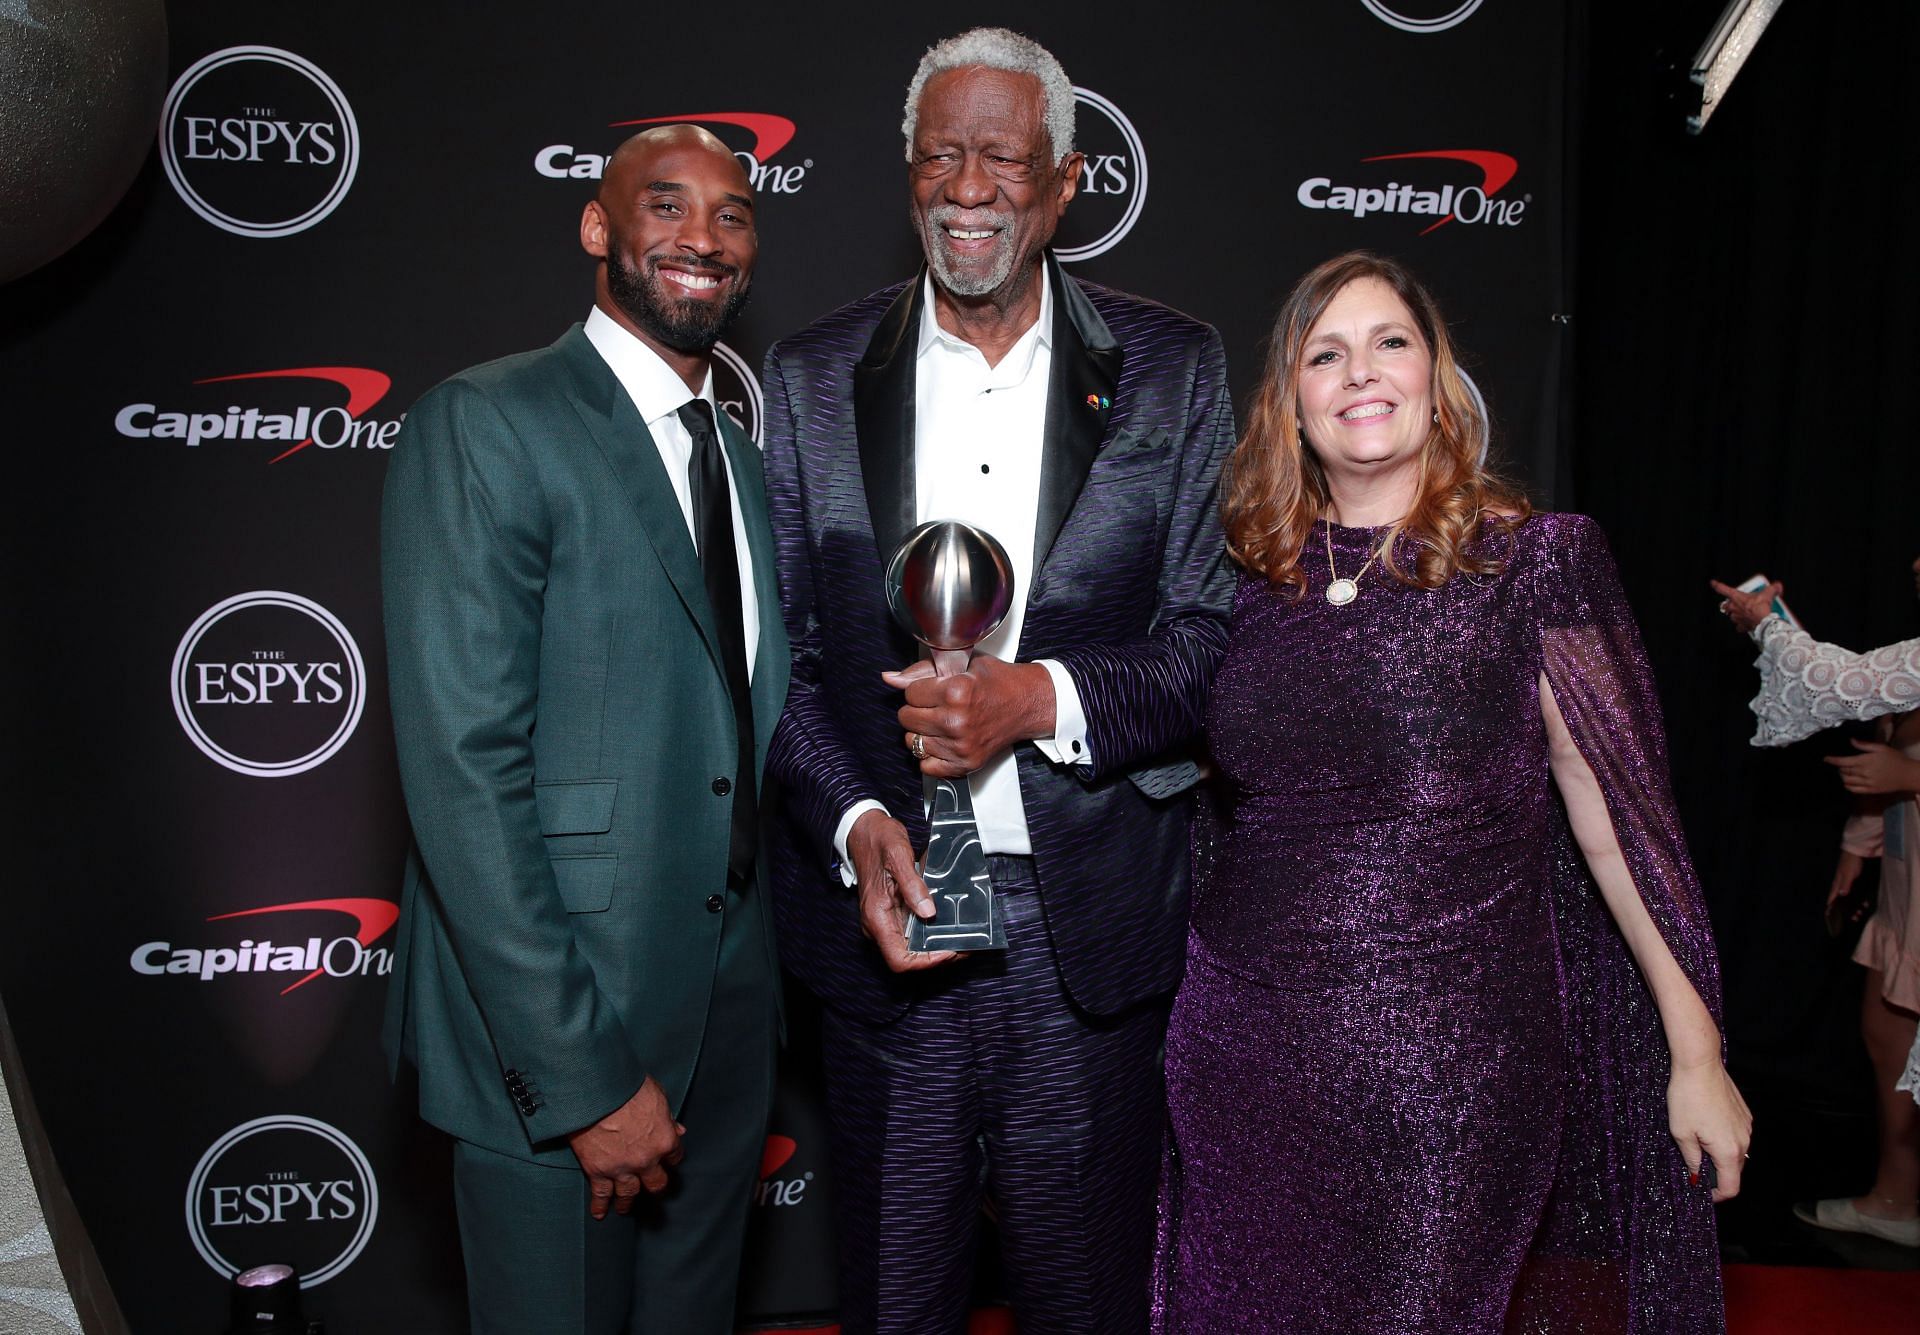 Bill Russell with his wife Jeannine Russell and Kobe Bryant at the ESPYS